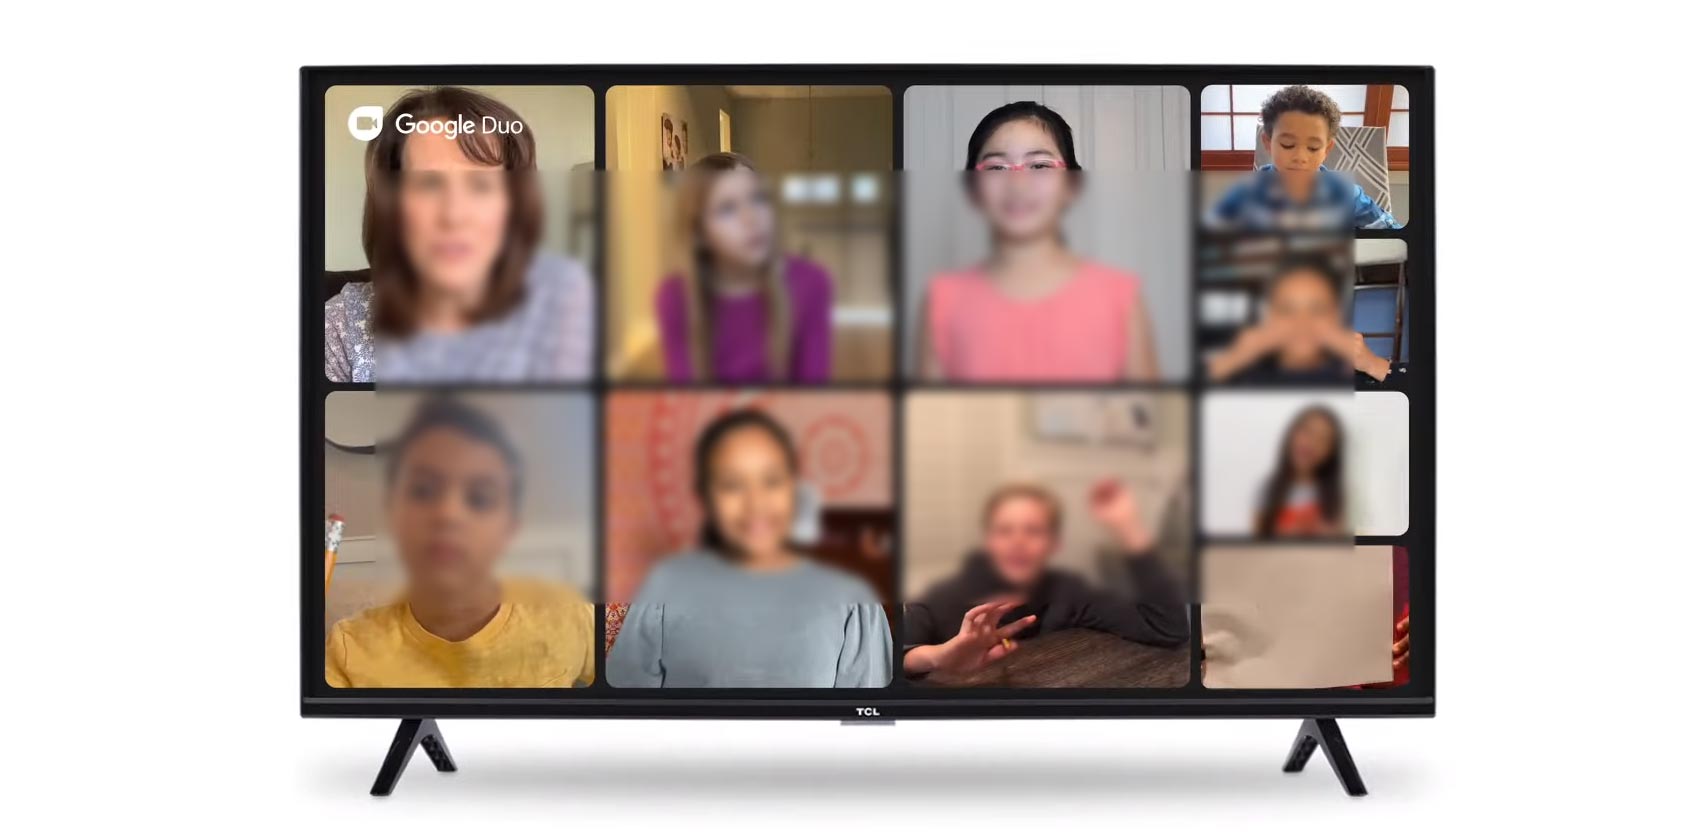 Google Duo on Android TV Cast